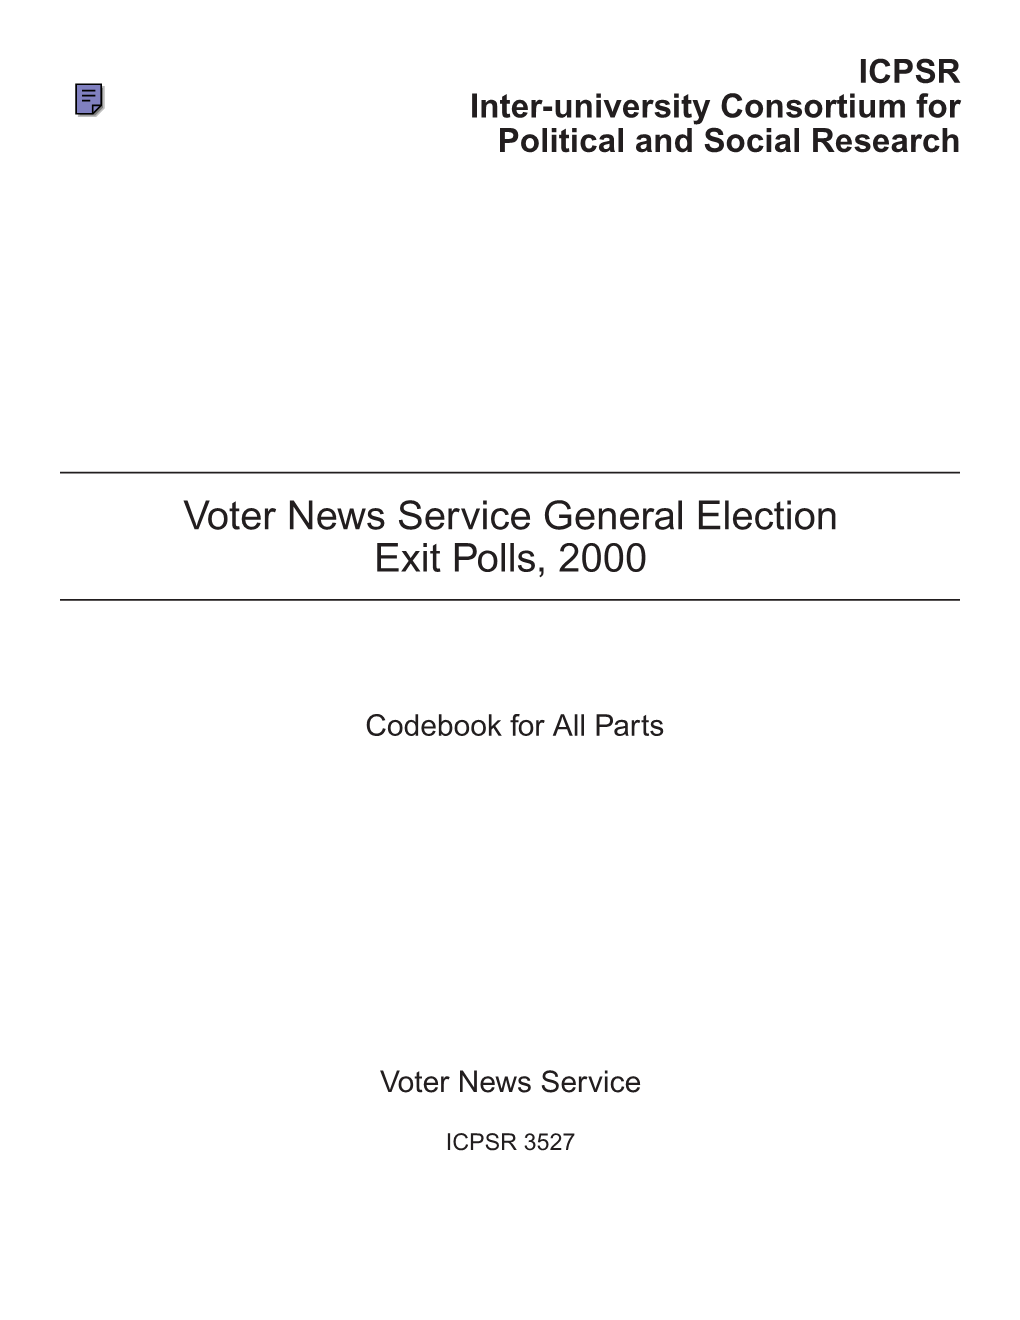 Voter News Service General Election Exit Polls, 2000 Codebook for All